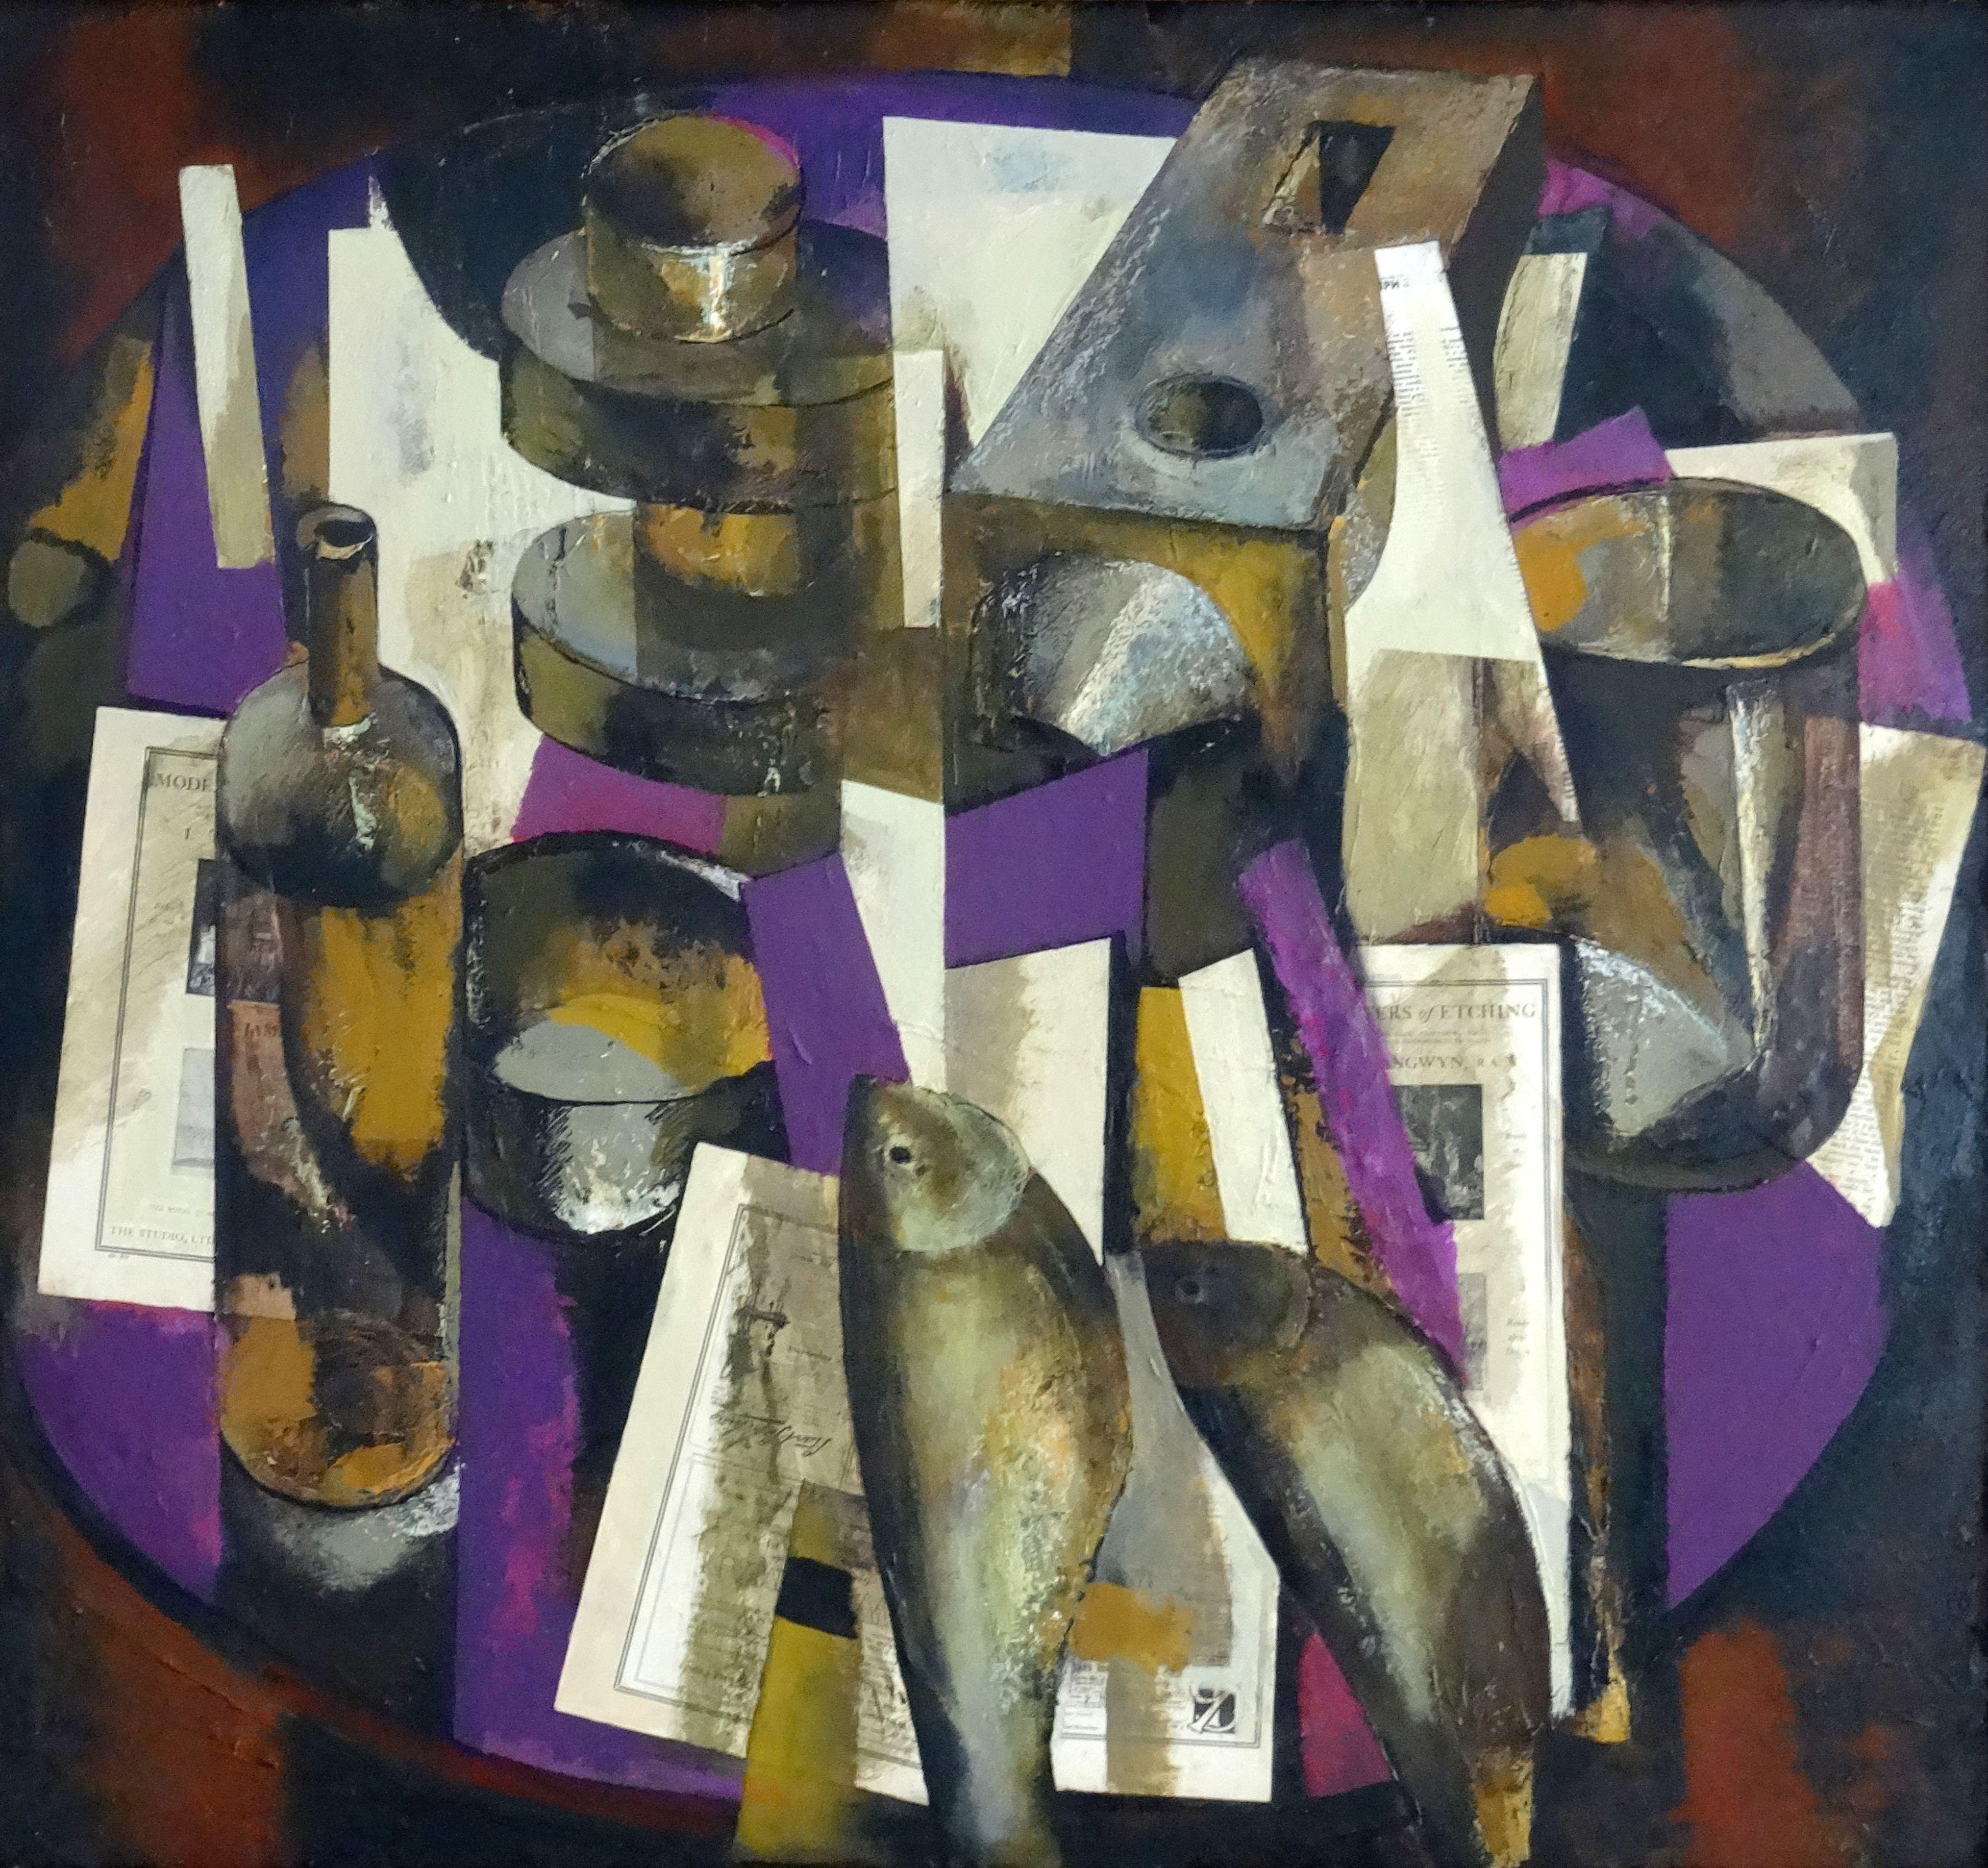 Still life with a bottle. 1994, oil on cardboard, 93, 5 x 101 cm